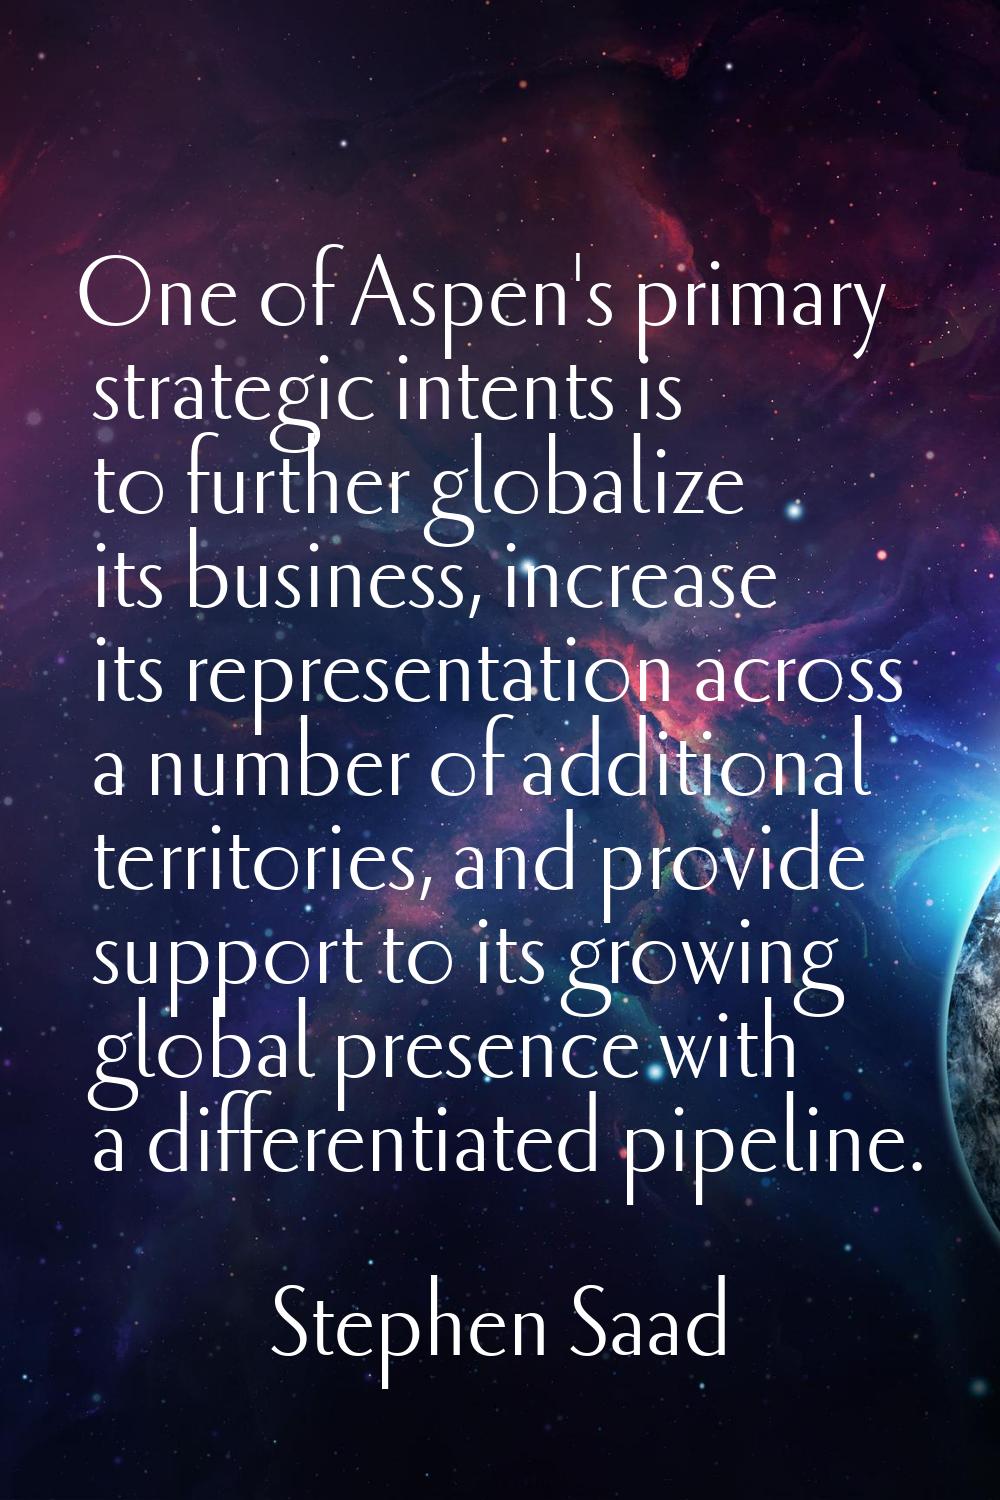 One of Aspen's primary strategic intents is to further globalize its business, increase its represe